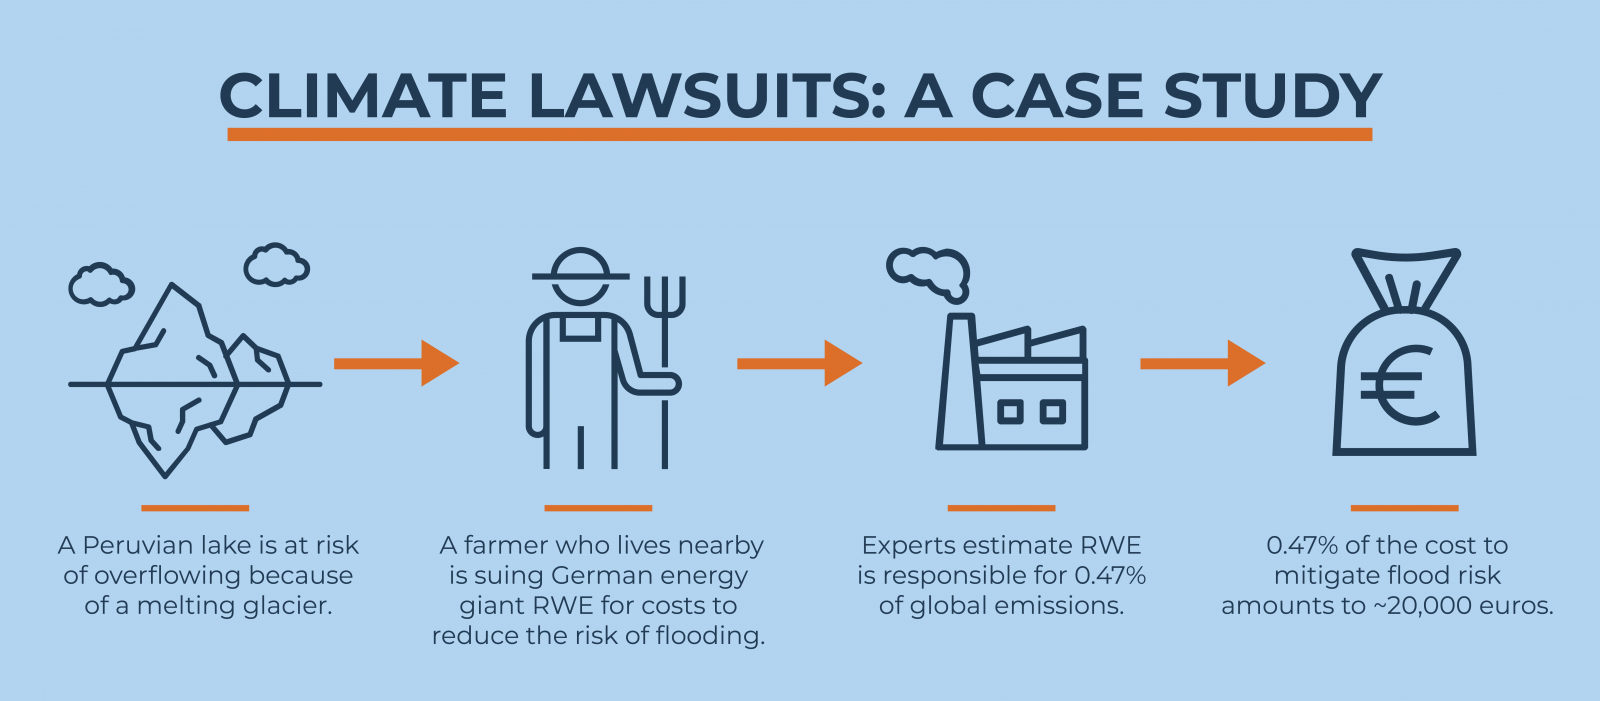 Infographic explaining a climate lawsuit by a Peruvian farmer against German energy company RWE